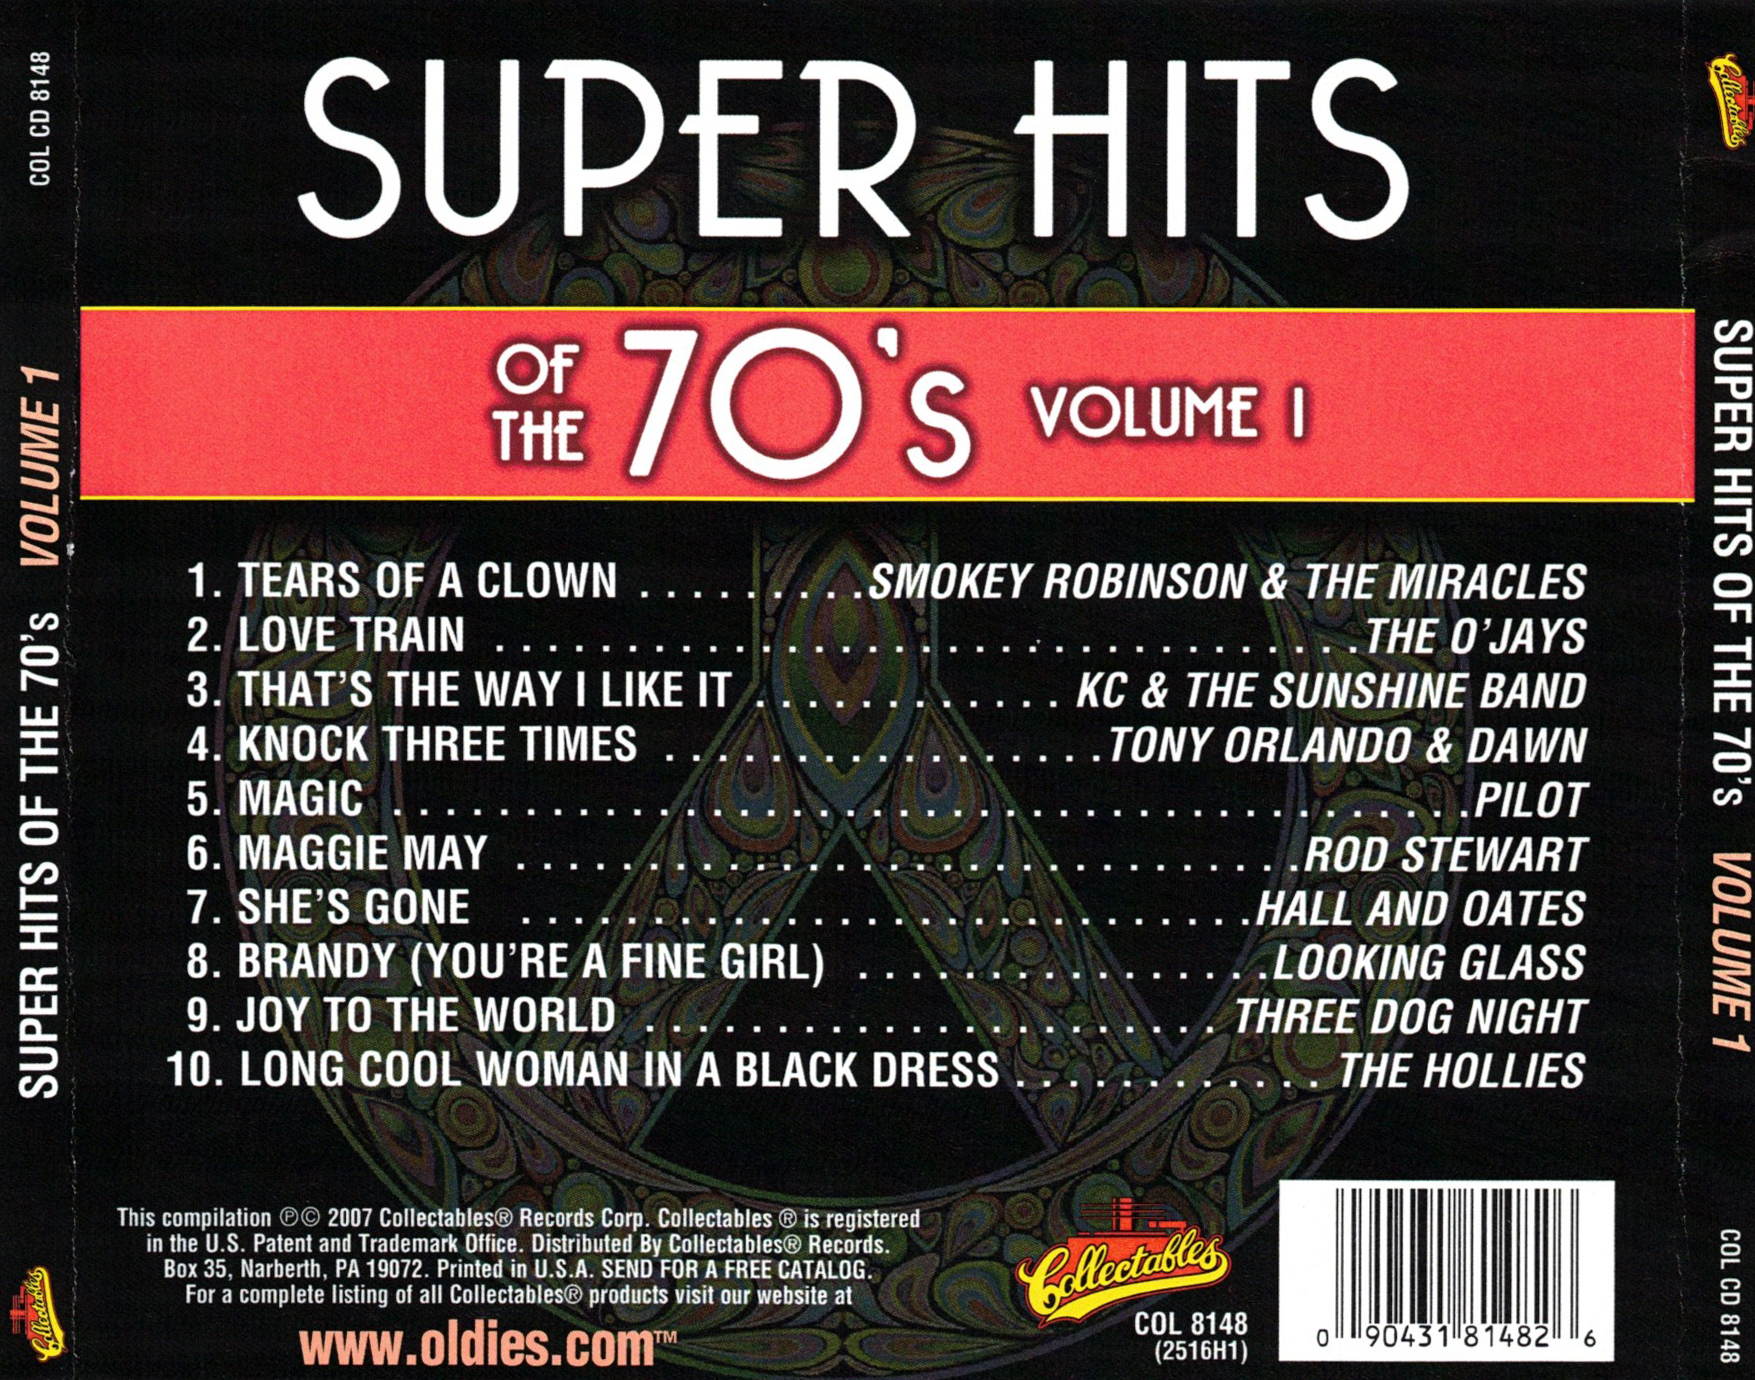 Super Hits Of The 70's, Volume 1